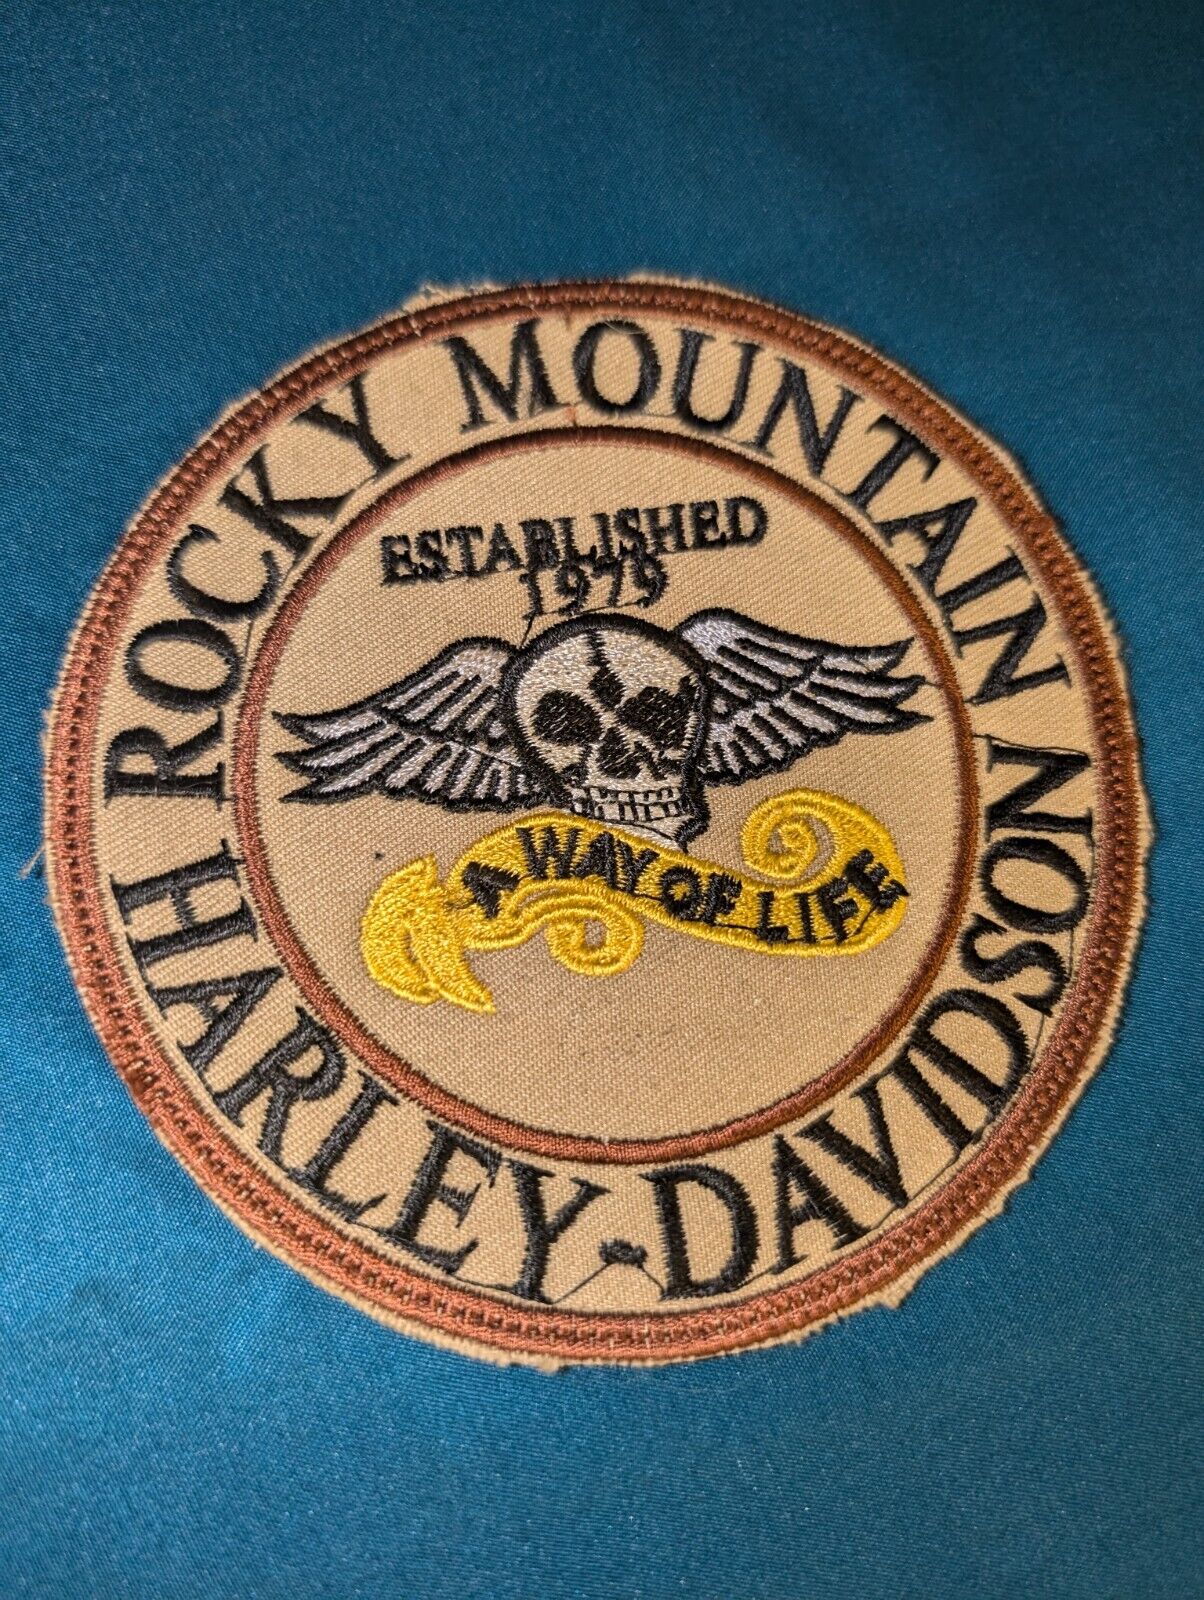 Rocky Mountain Harley-Davidson “A Way Of Life” Embroidered Patch